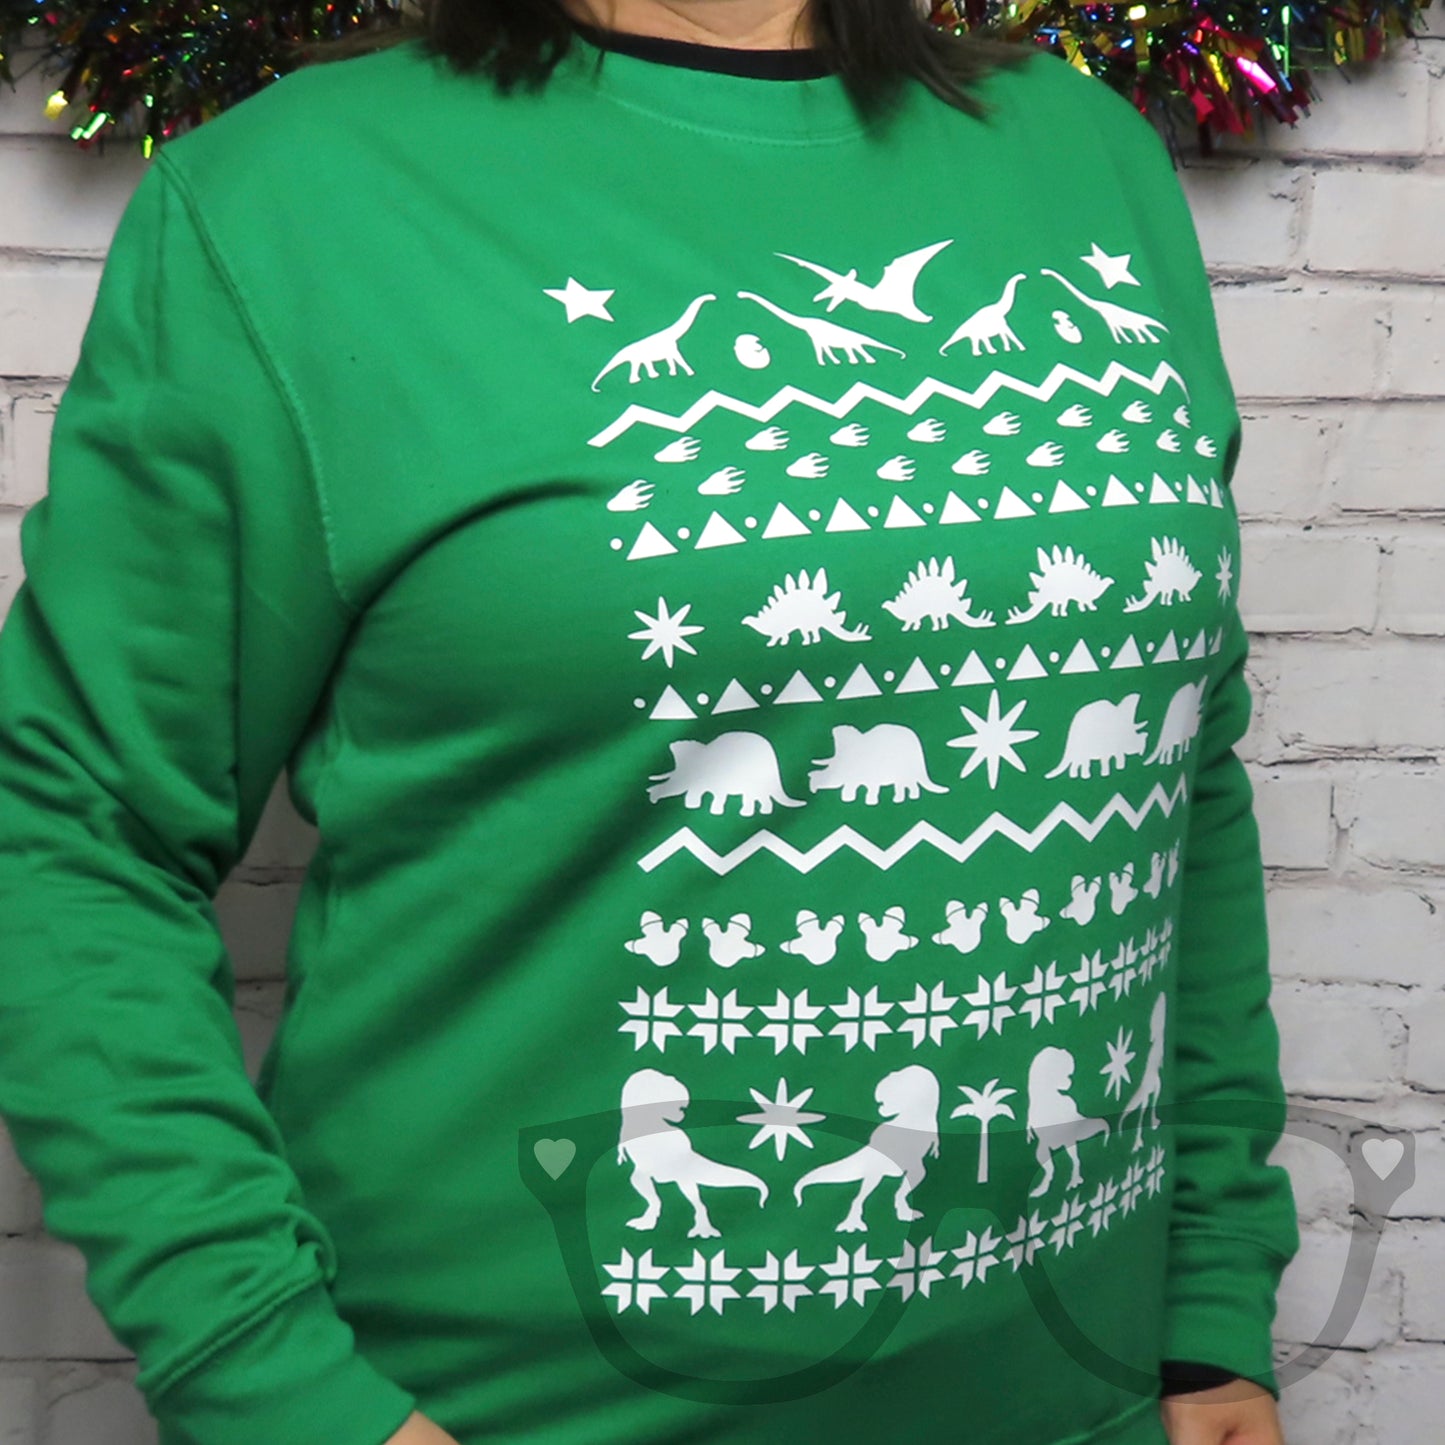 A three quarter view showing the green dinosaur sweater being worn.  The full length white design shows rows of dinosaurs, shapes and dino footprints . Ideal for winter, festive celebrations